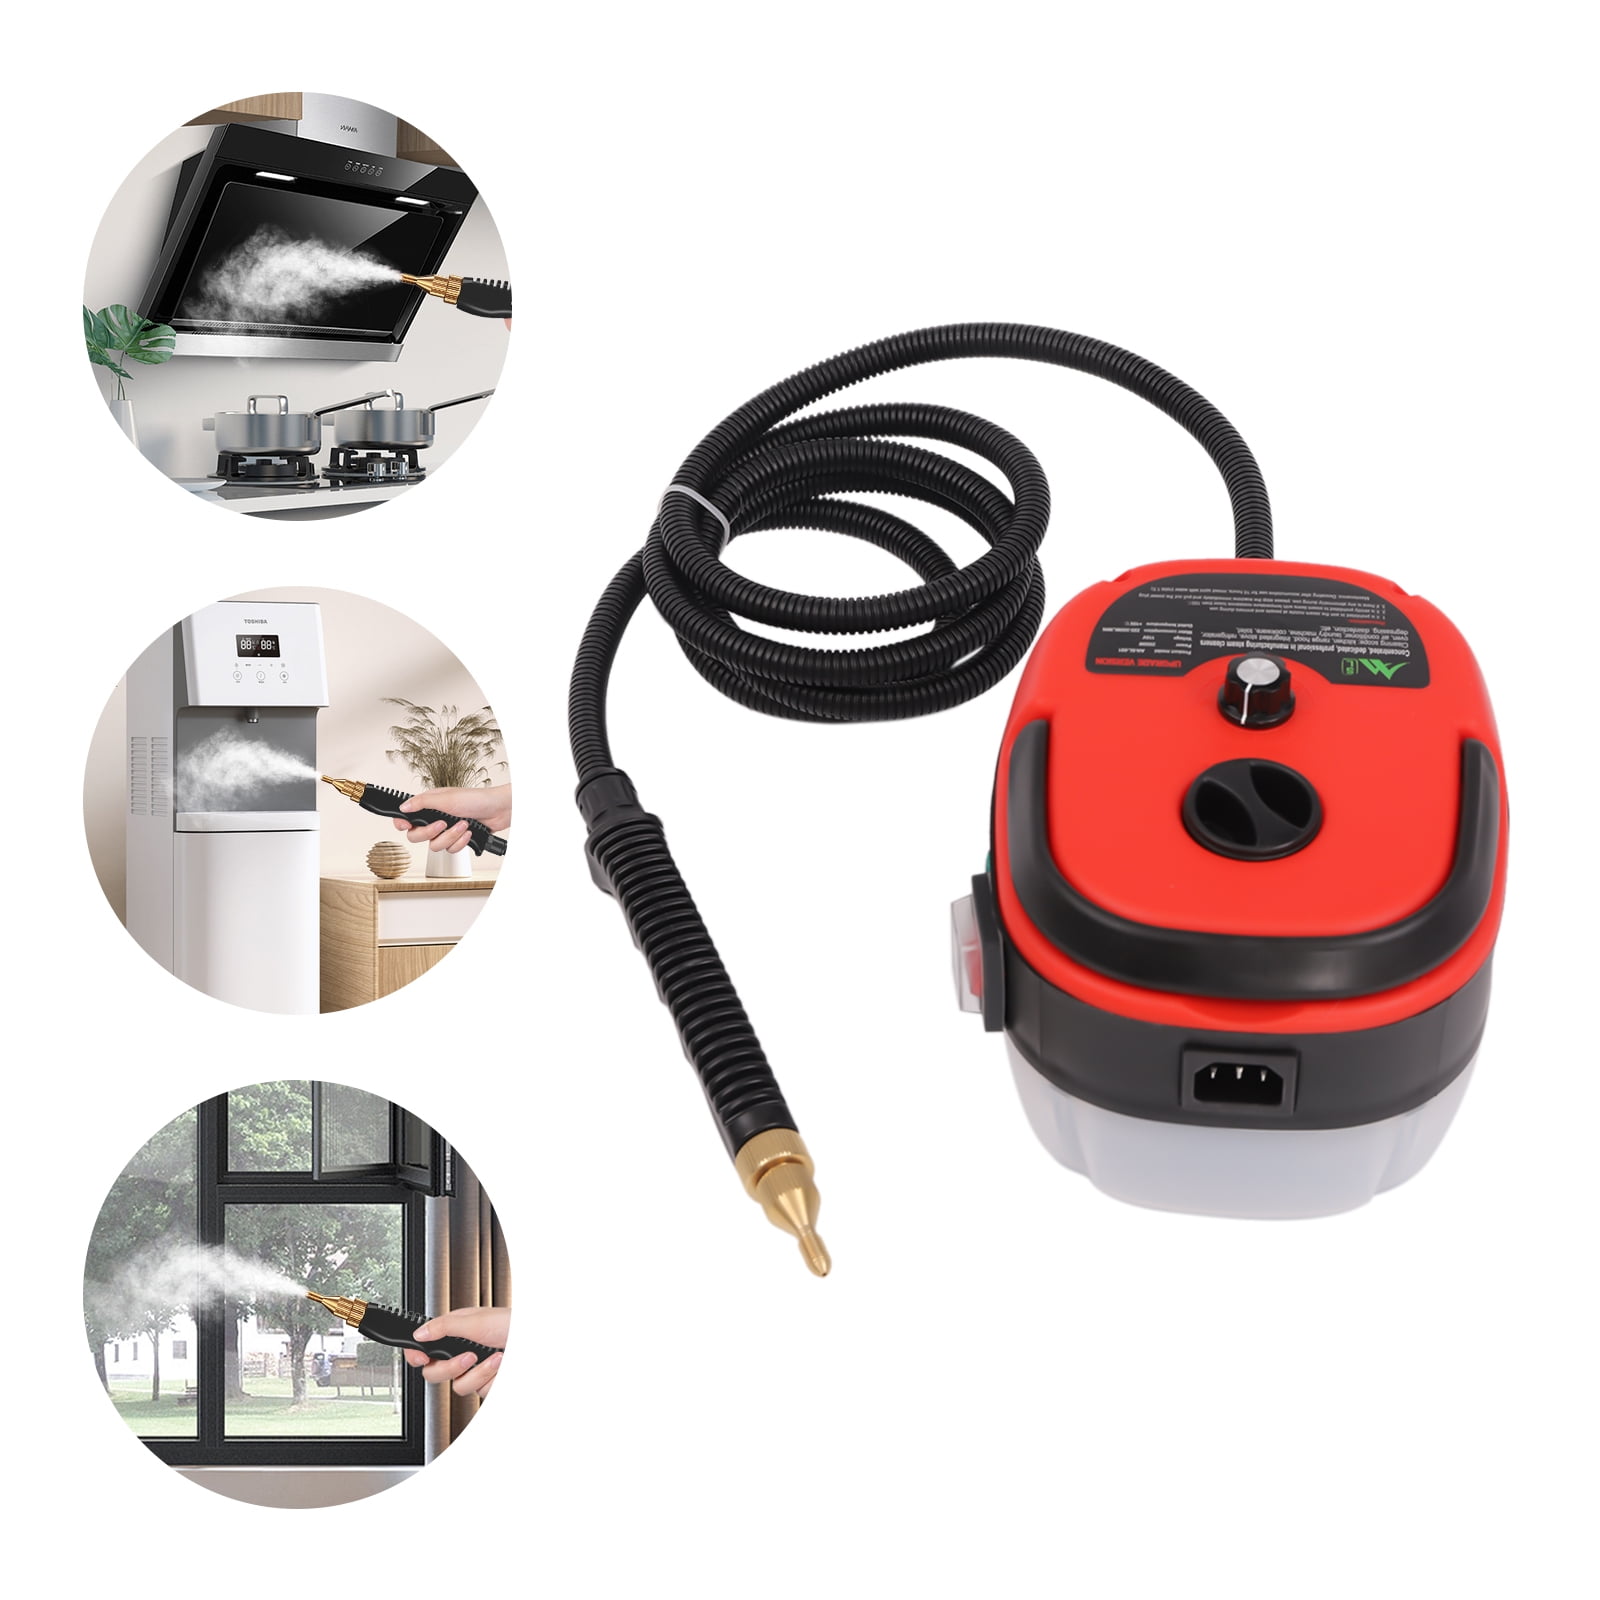 110V-220V Portable High Pressure Steam Cleaner Car Multifunctional Cleaning  Machine Air Conditioning Home Kitchen Hood